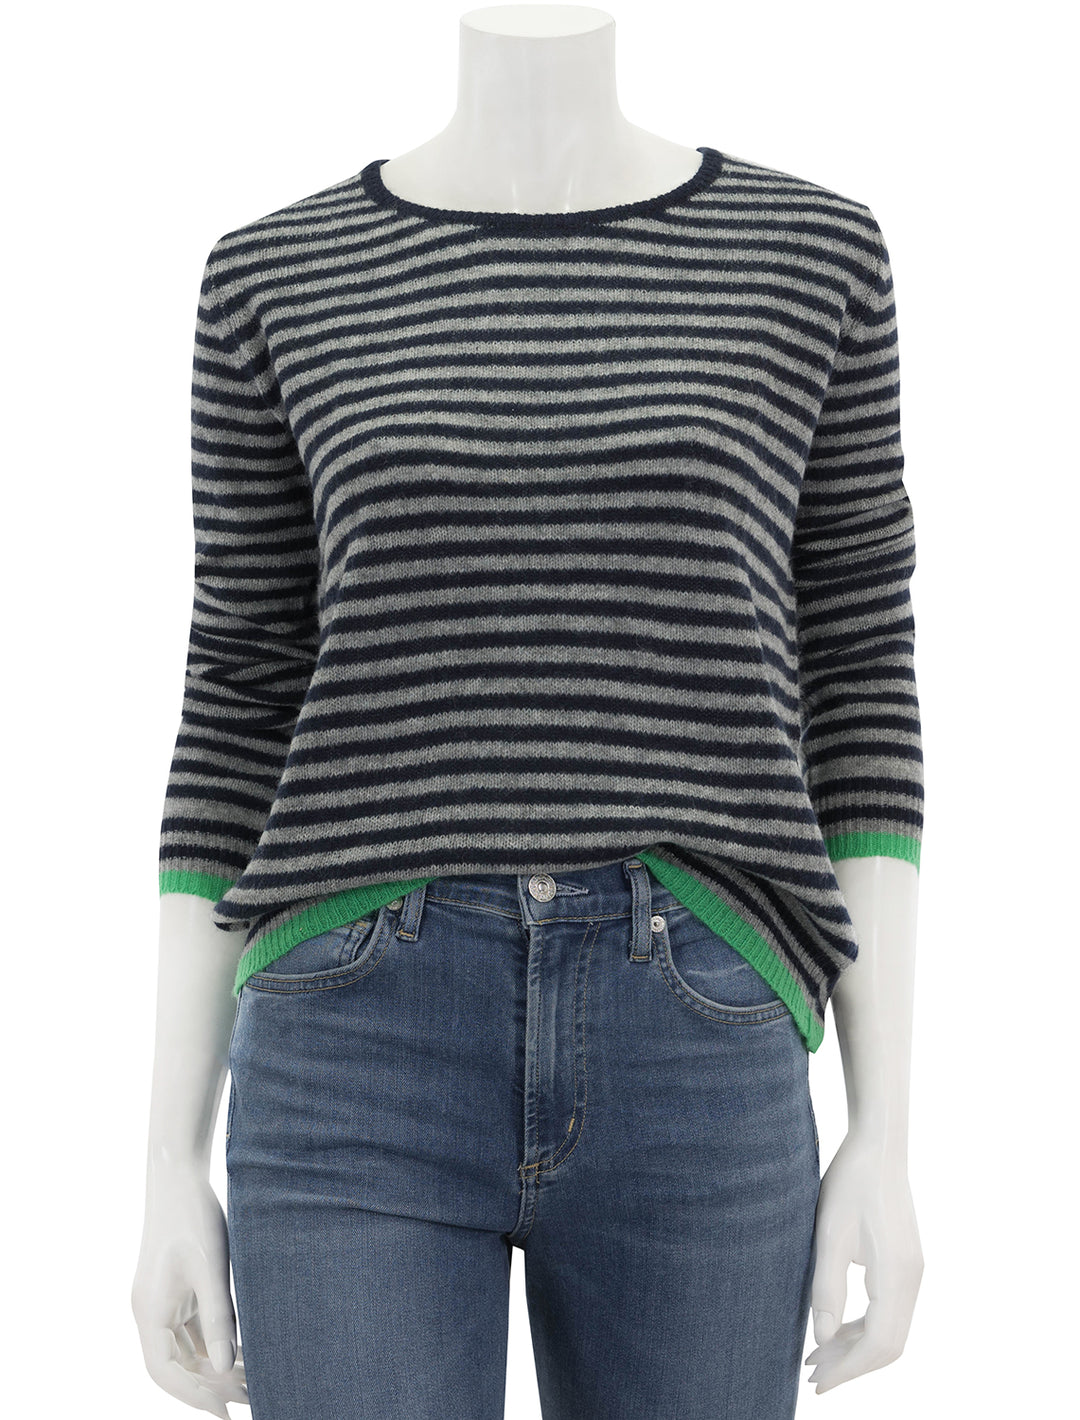 Front view of Jumper 1234's little stripe crew in navy, grey and green.